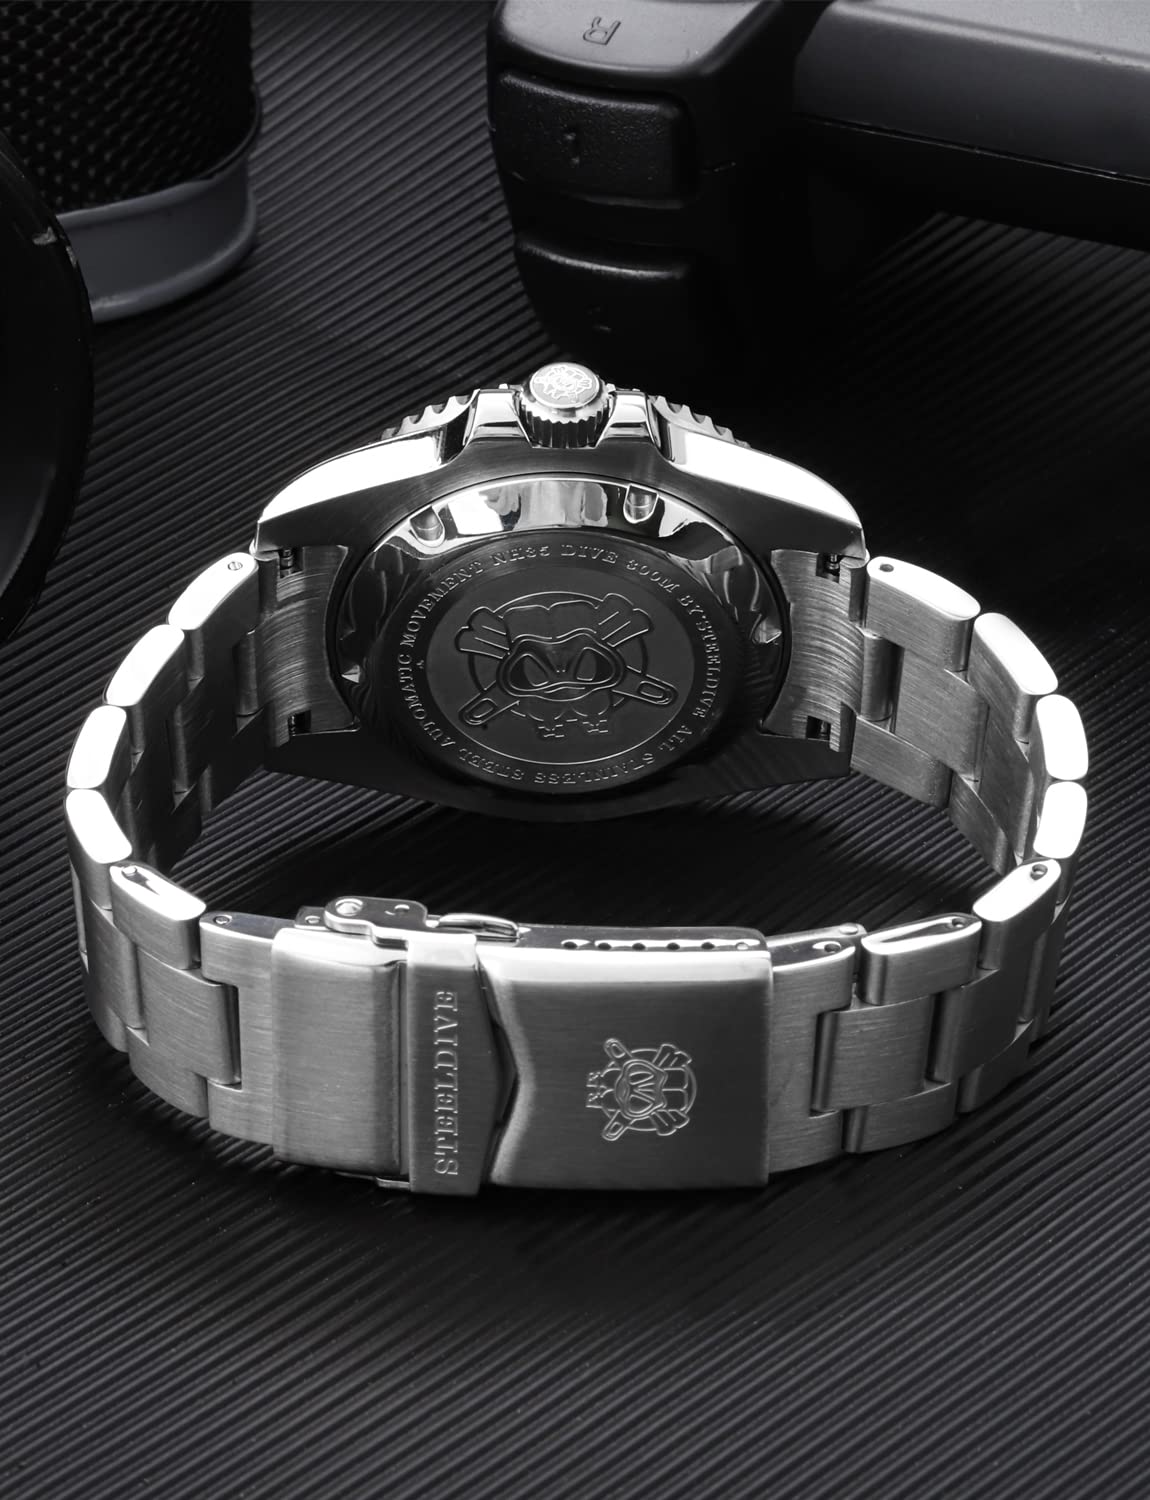 Steeldive Men's Automatic Watch SD1953 Stainless Steel NH35 Movement 300m Diving Watches